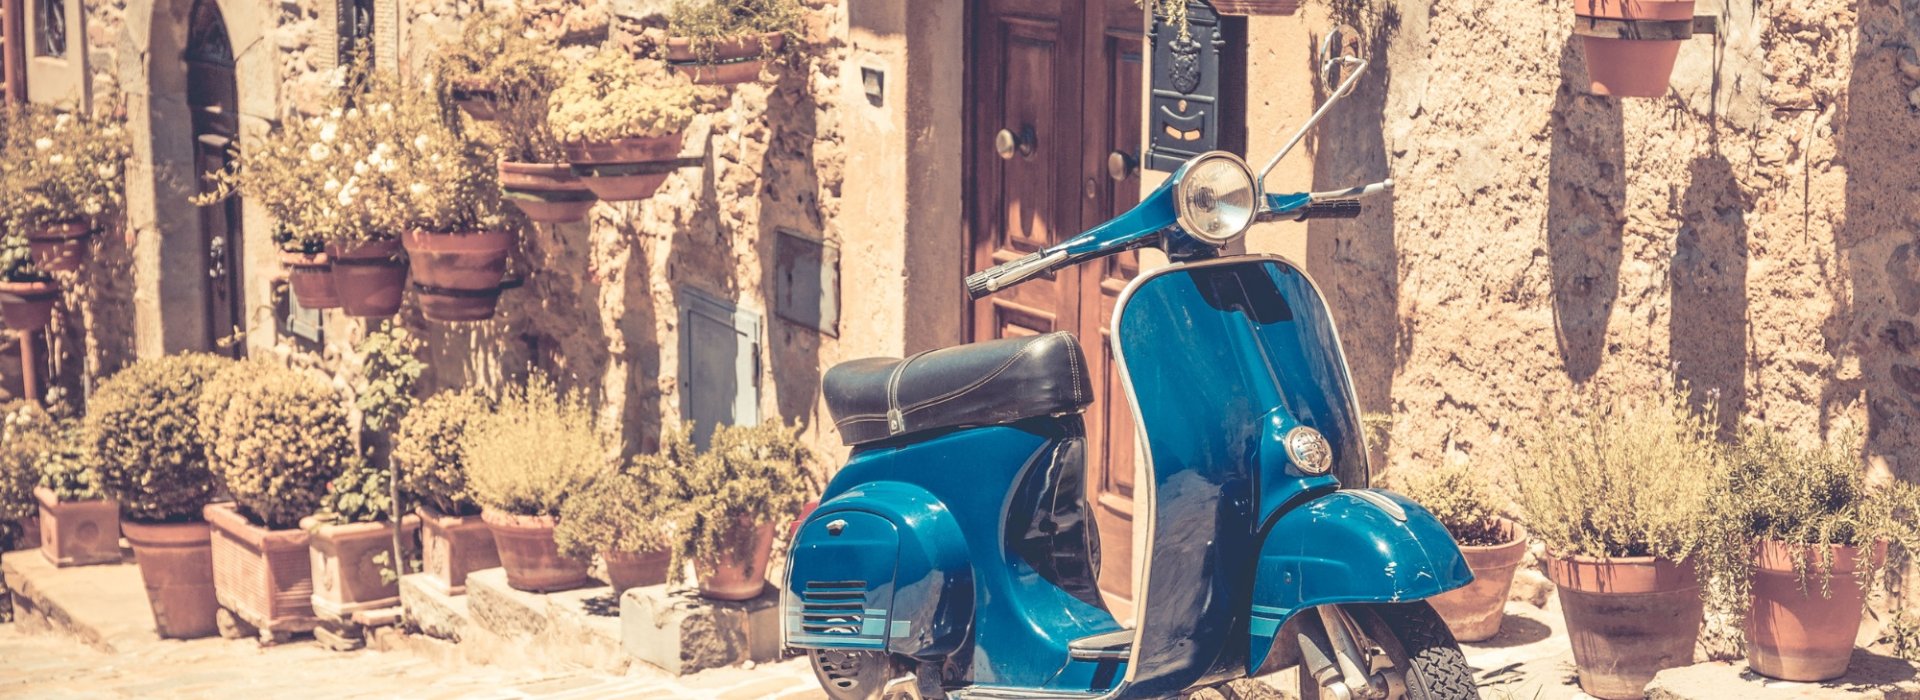 Val d'Orcia Vespa tour in Tuscany